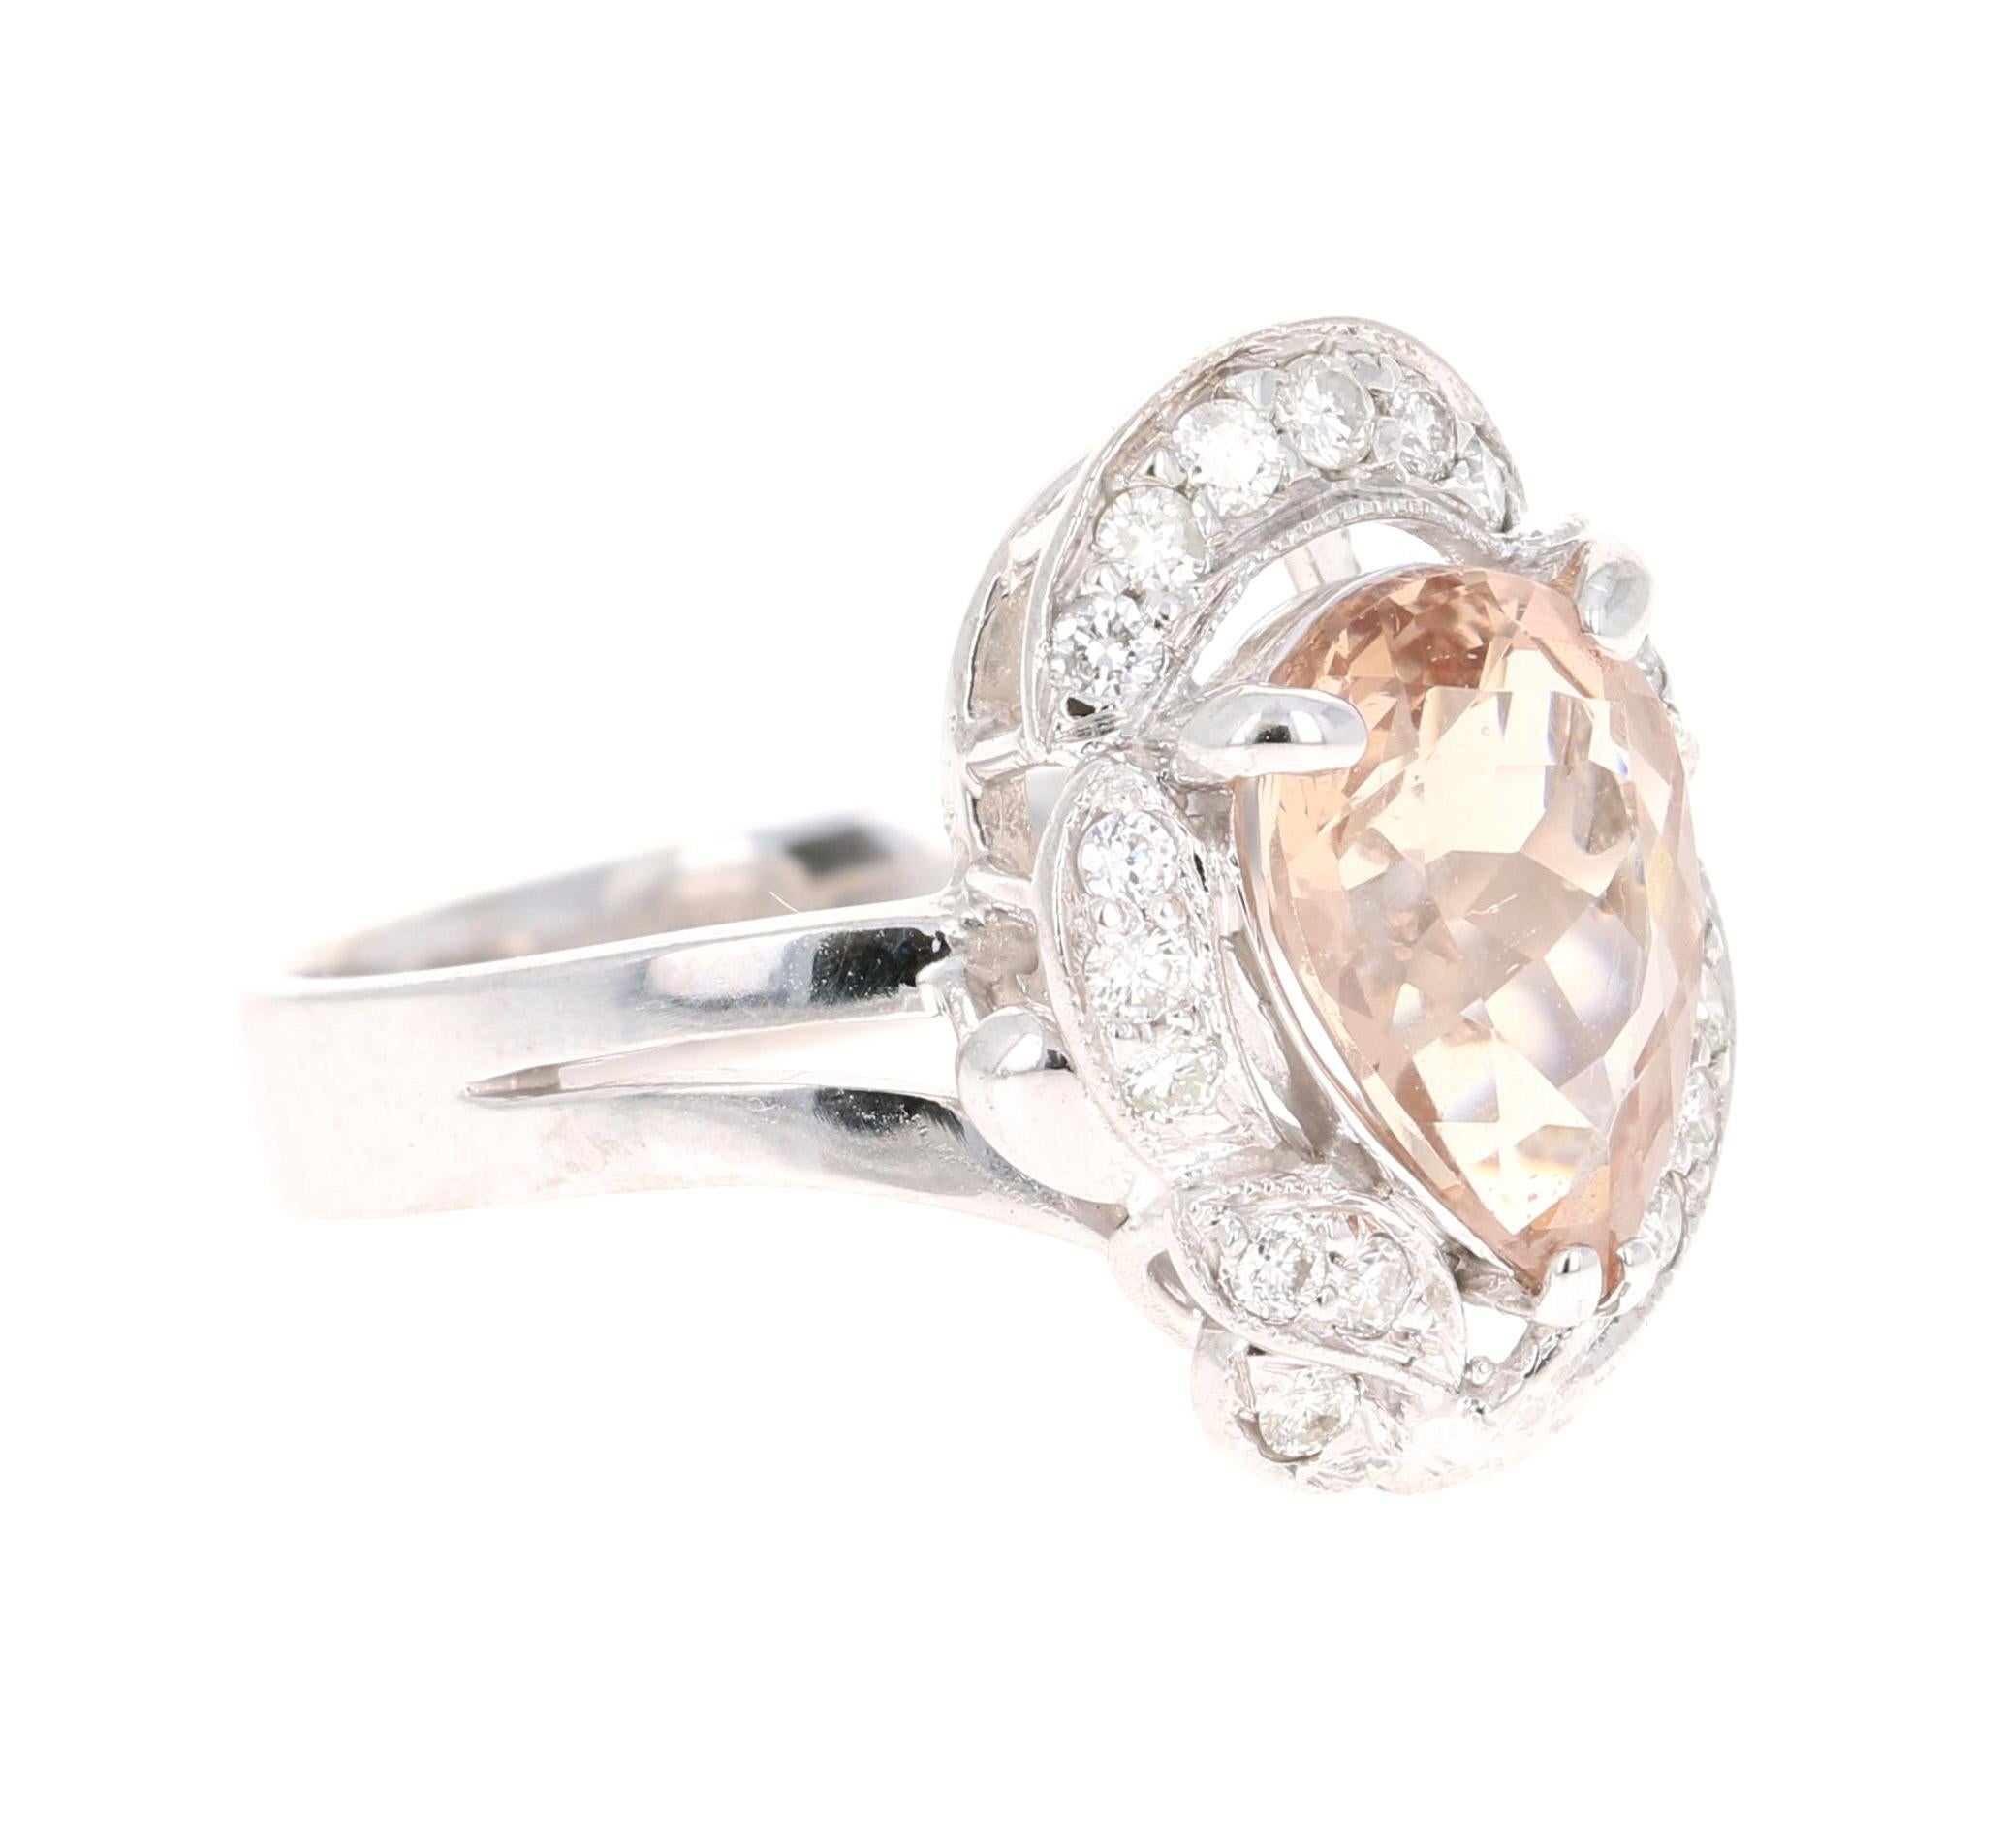 Gorgeous and Unique Morganite Diamond Ring! 

This Morganite ring has a gorgeous 2.61 Carat Pear Cut Morganite and is surrounded by 19 Round Cut Diamonds that weigh 0.34 Carats.  The diamonds have a clarity and color of SI-F. The total carat weight